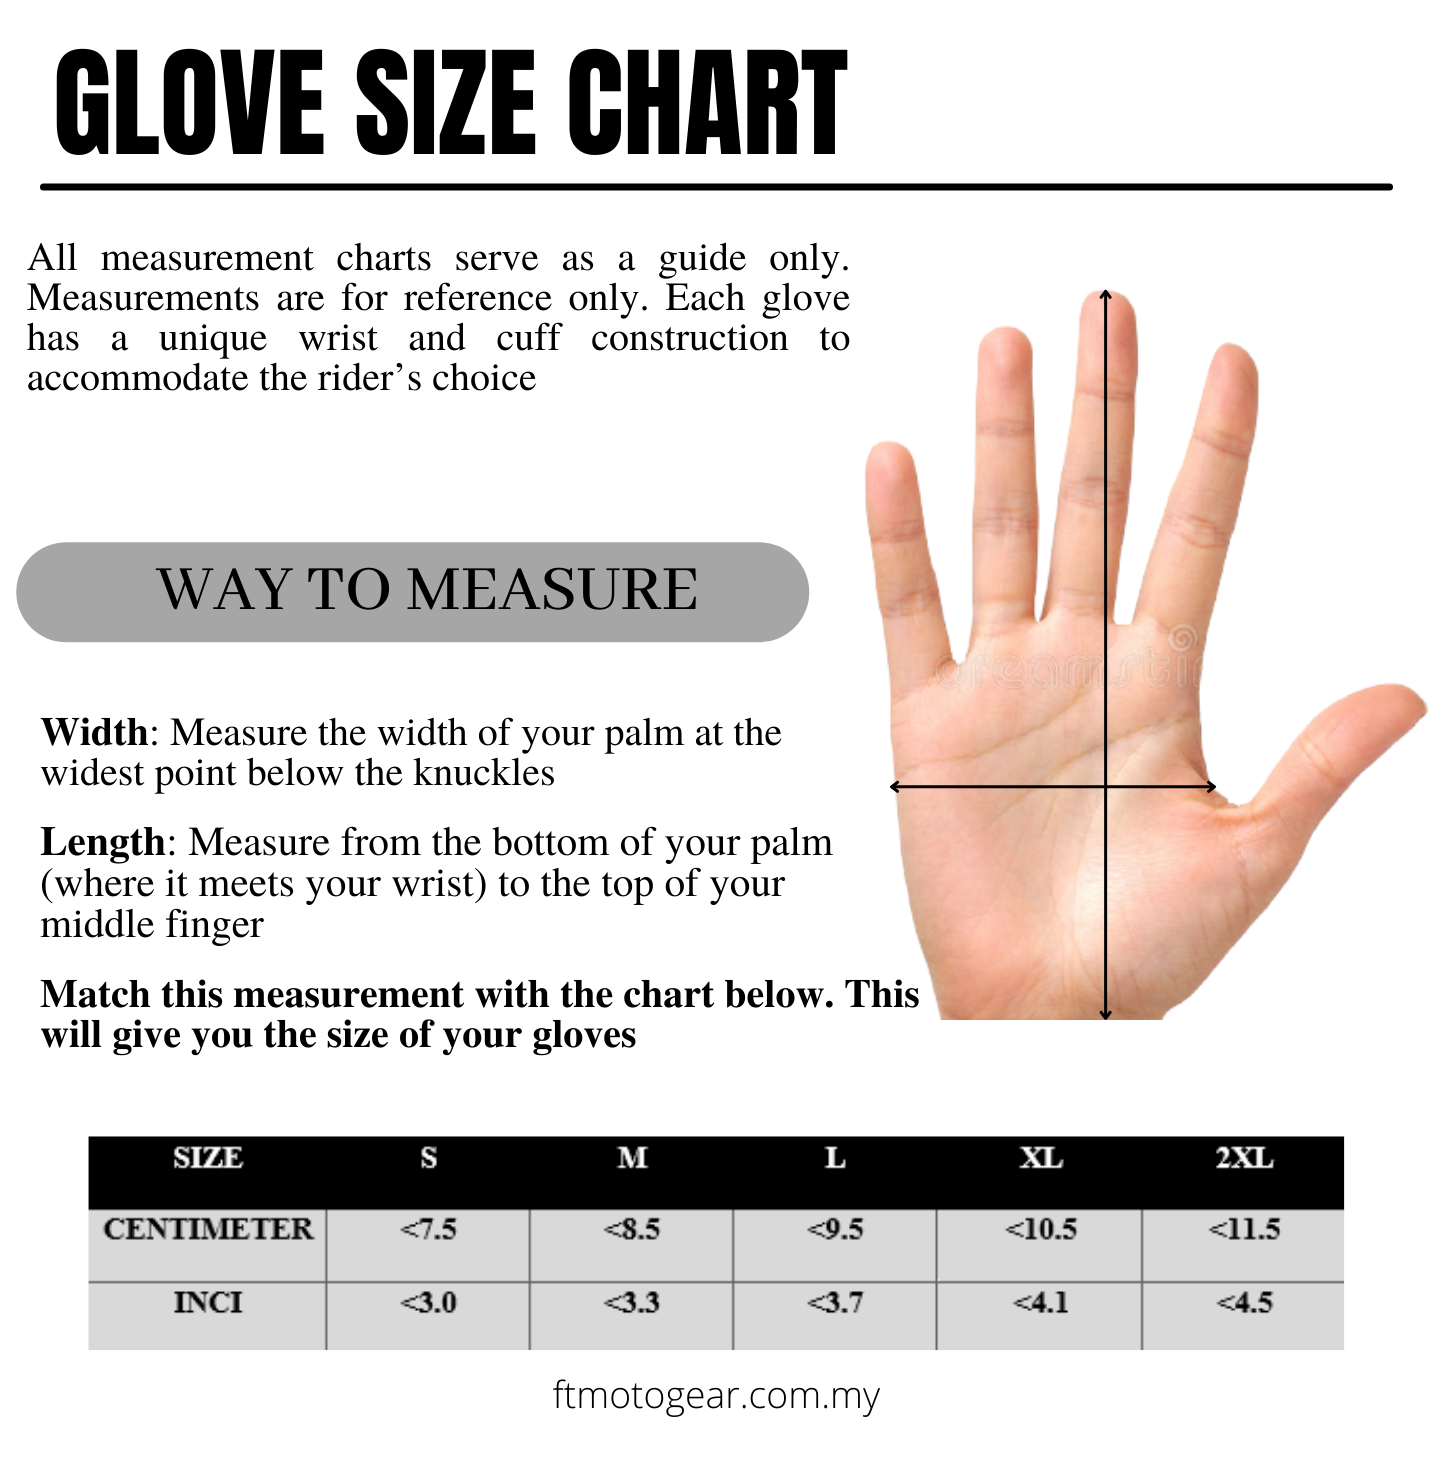 GLOVE SIZE CHART.png